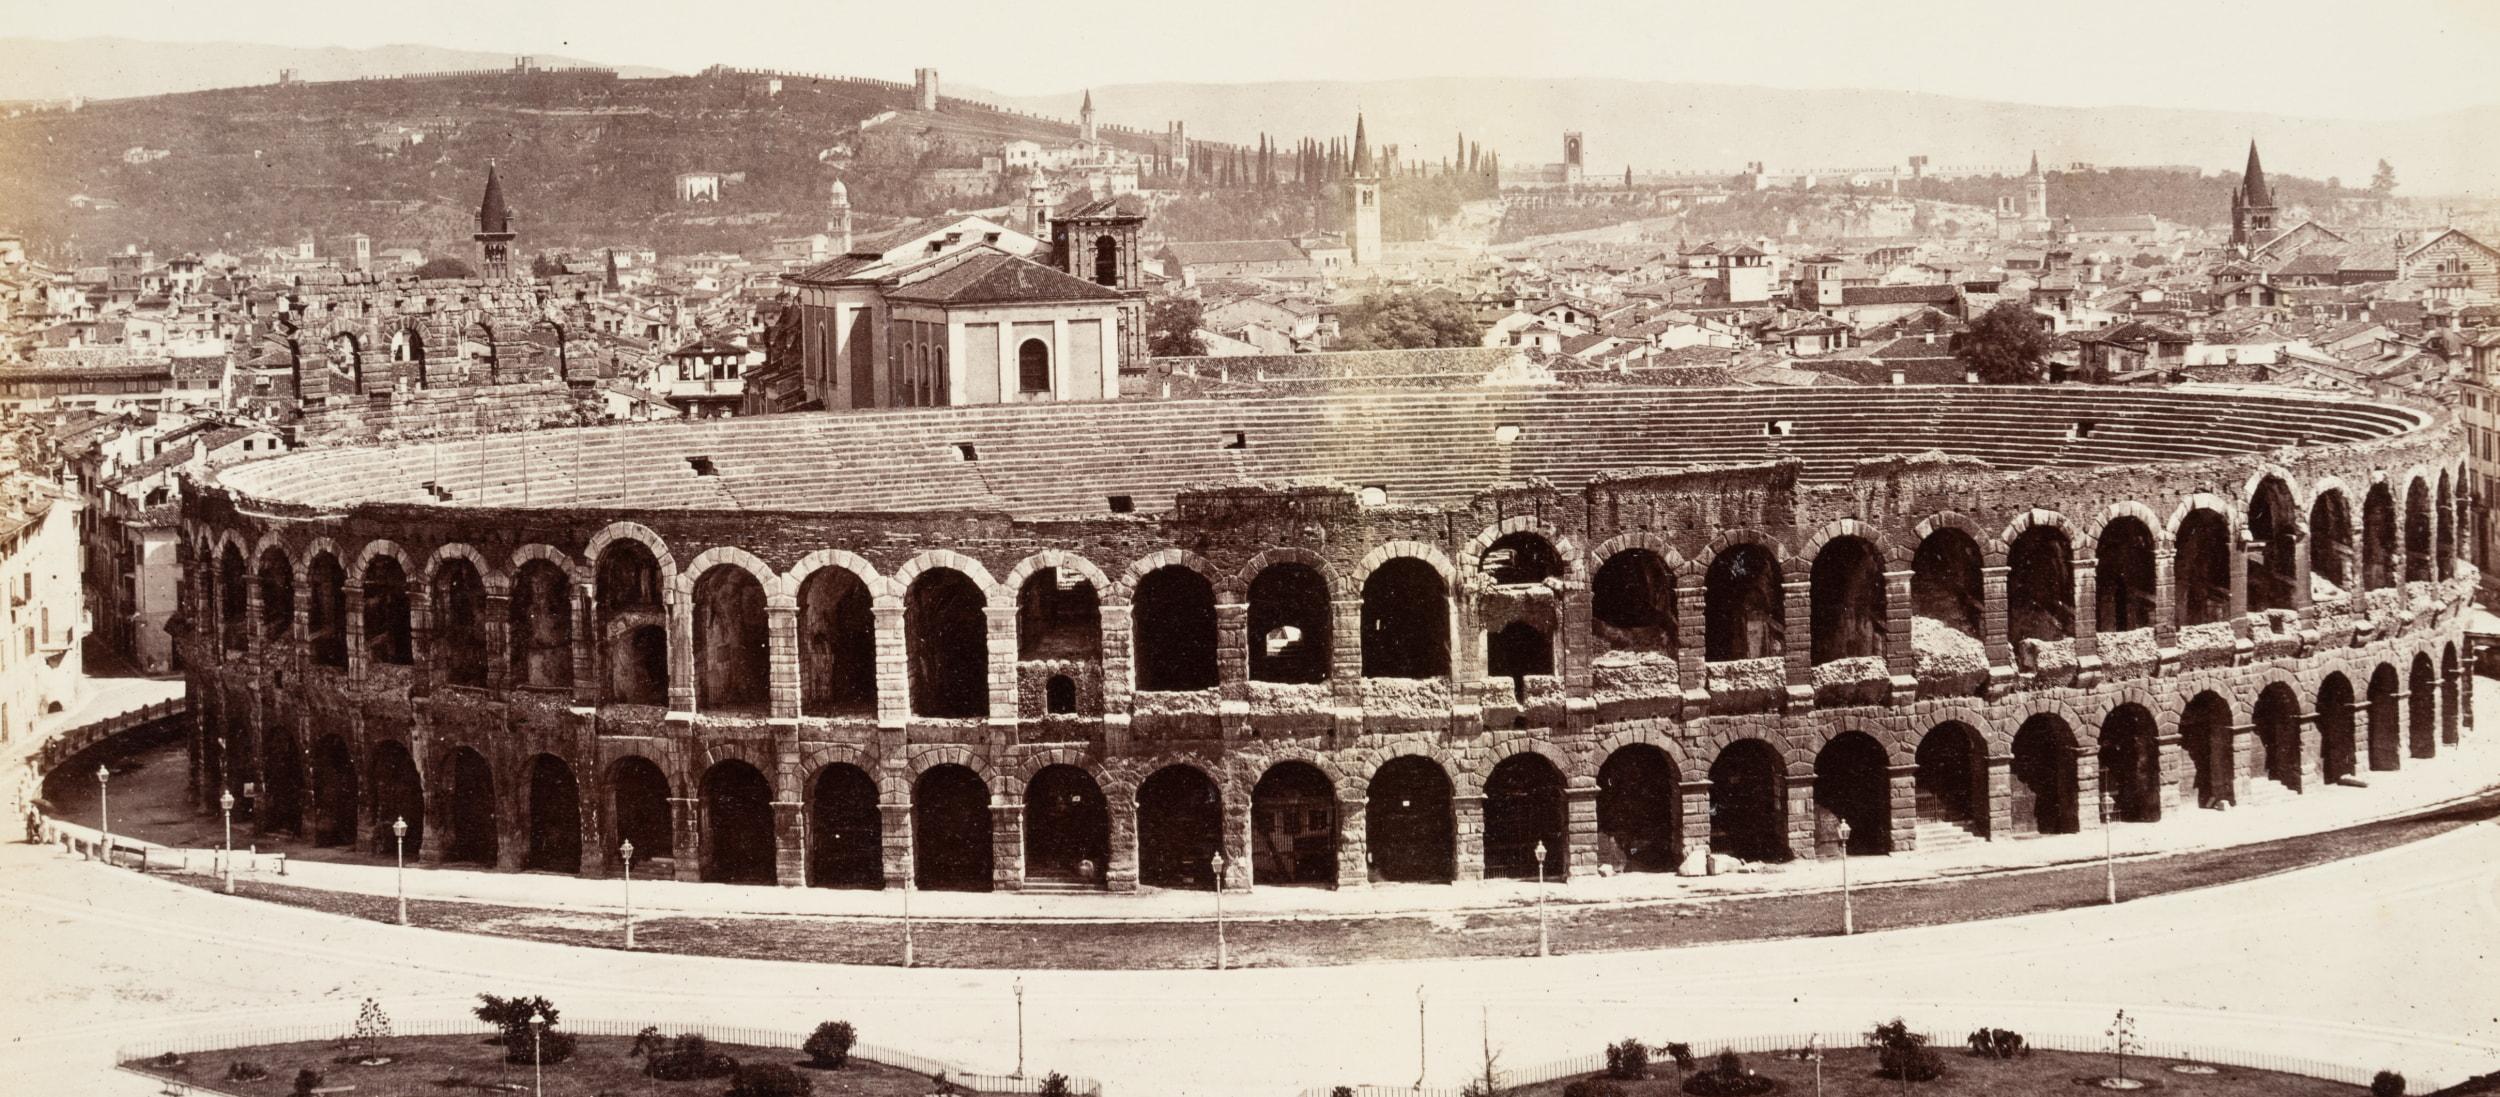 Arena in Verona - Photograph by Giorgio Sommer